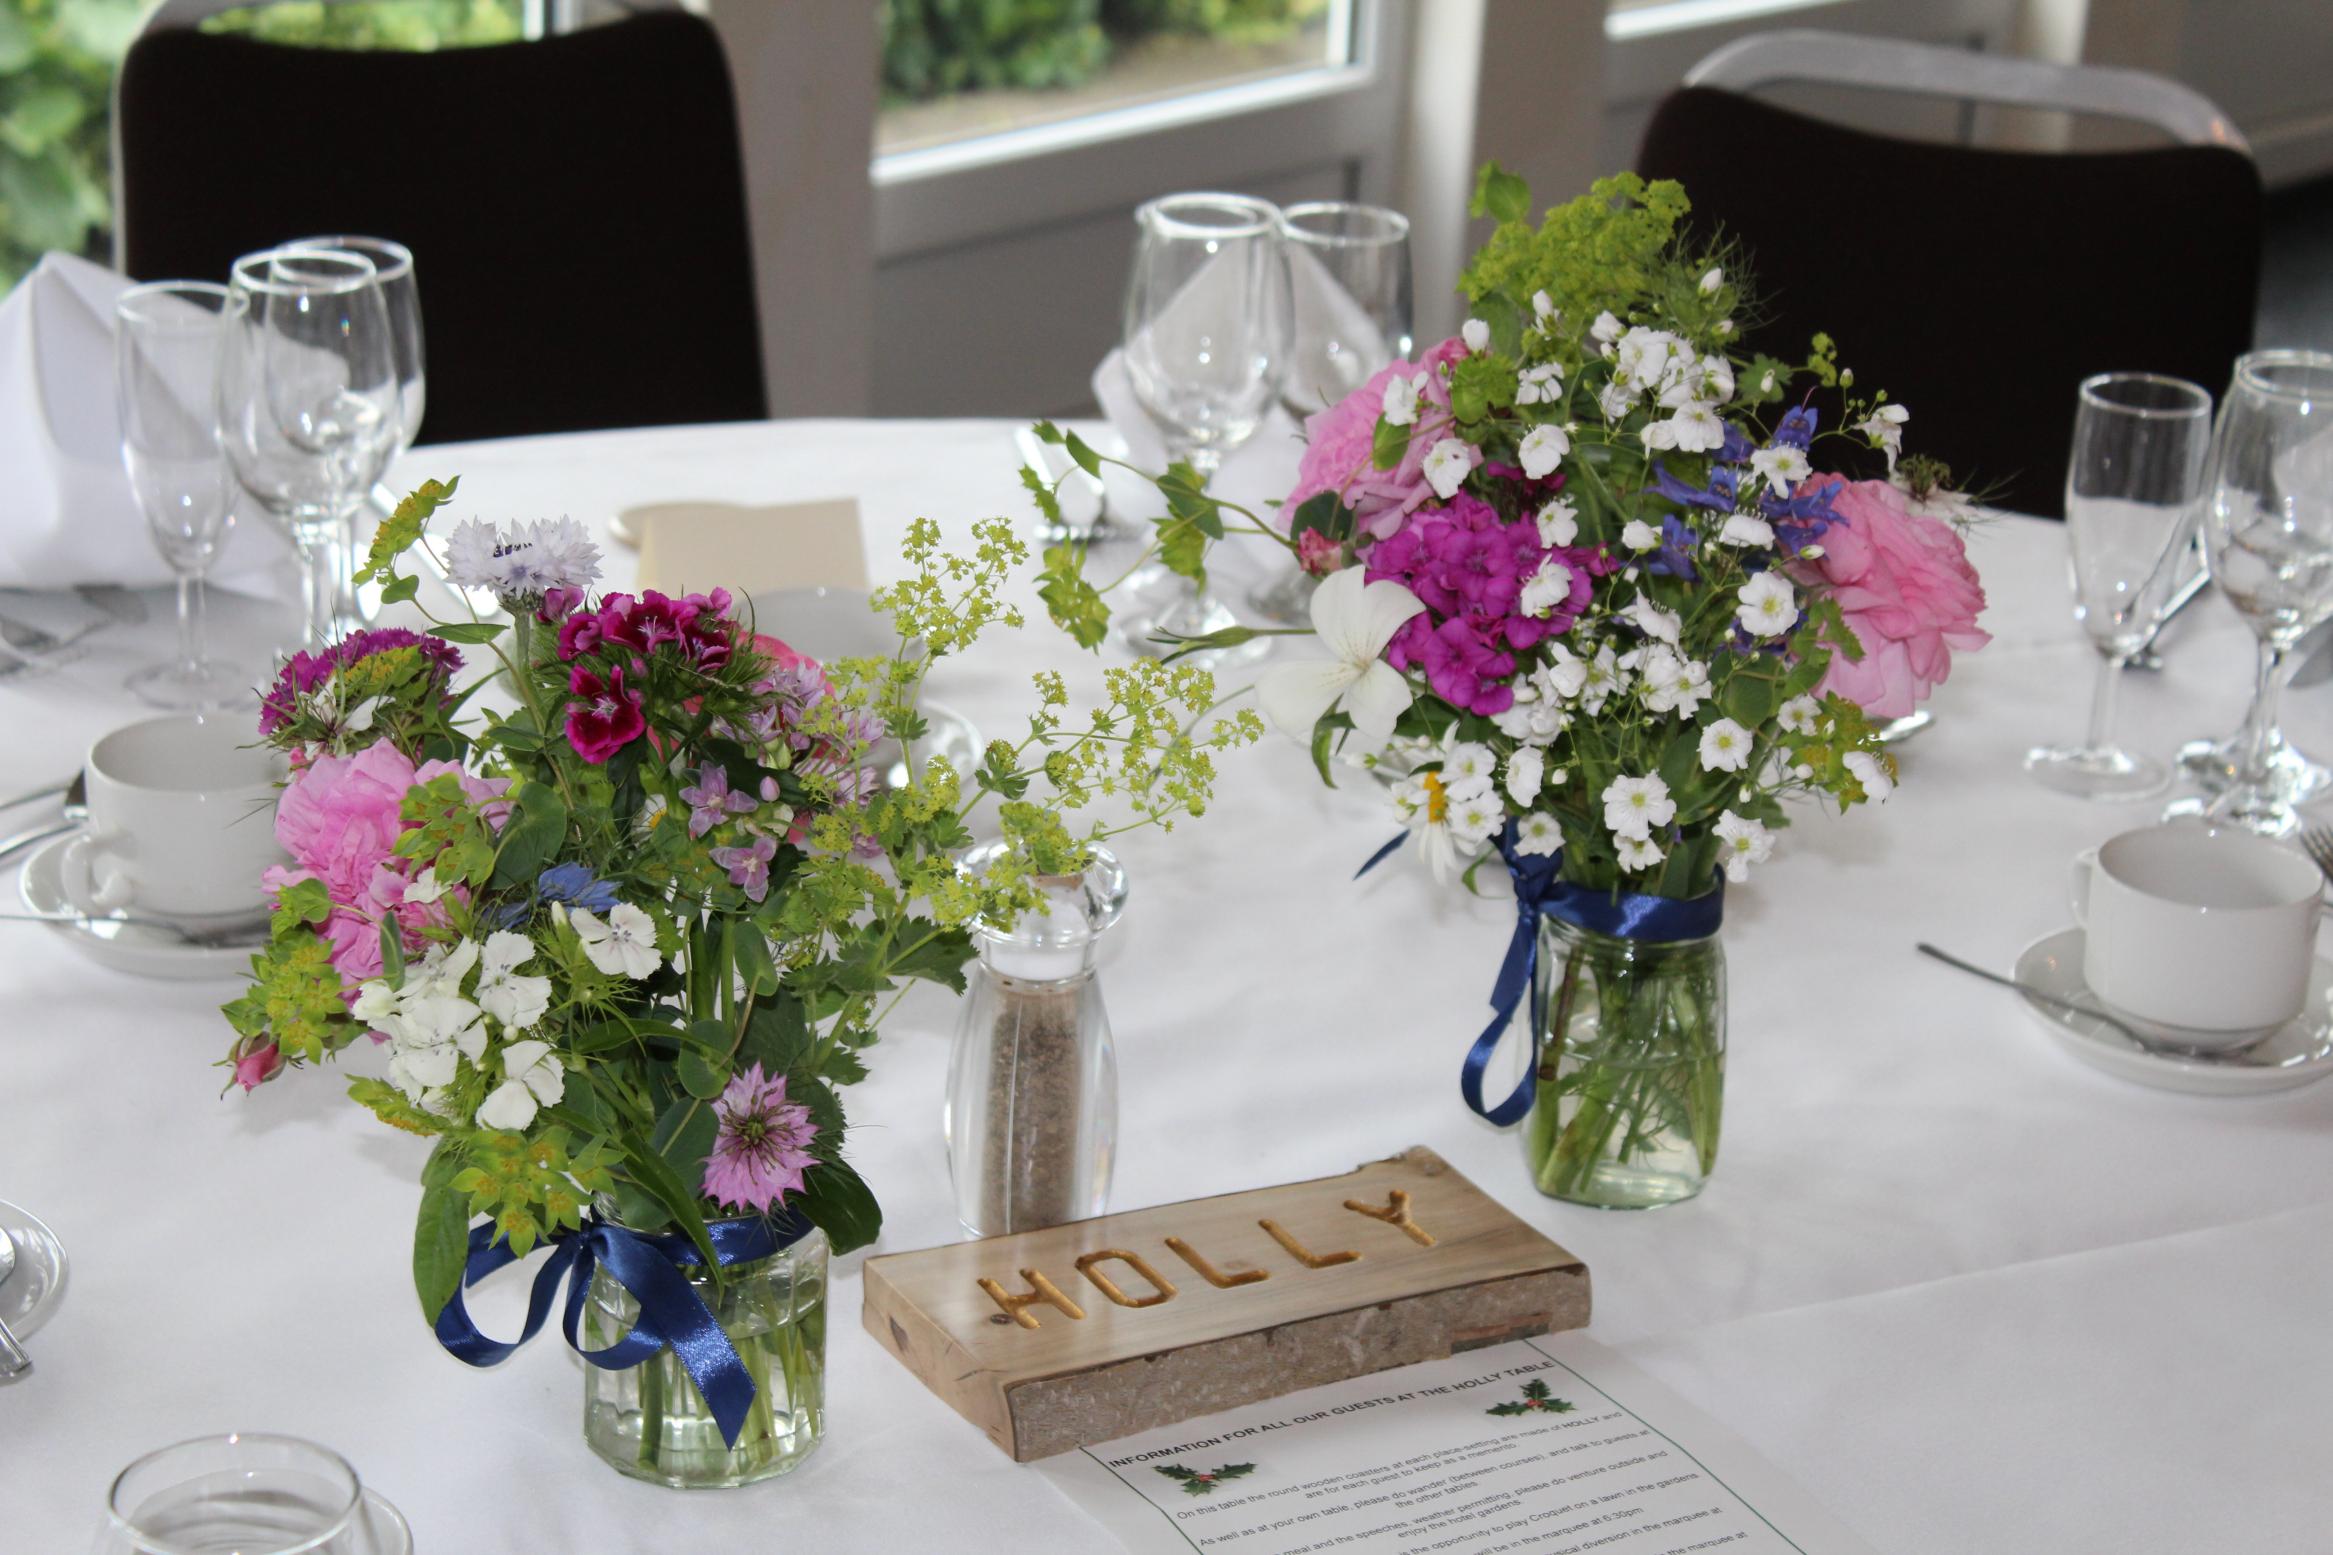 Monday morning 5th June, flowers on the Holly table set for the reception at Hunton Park Hotel.